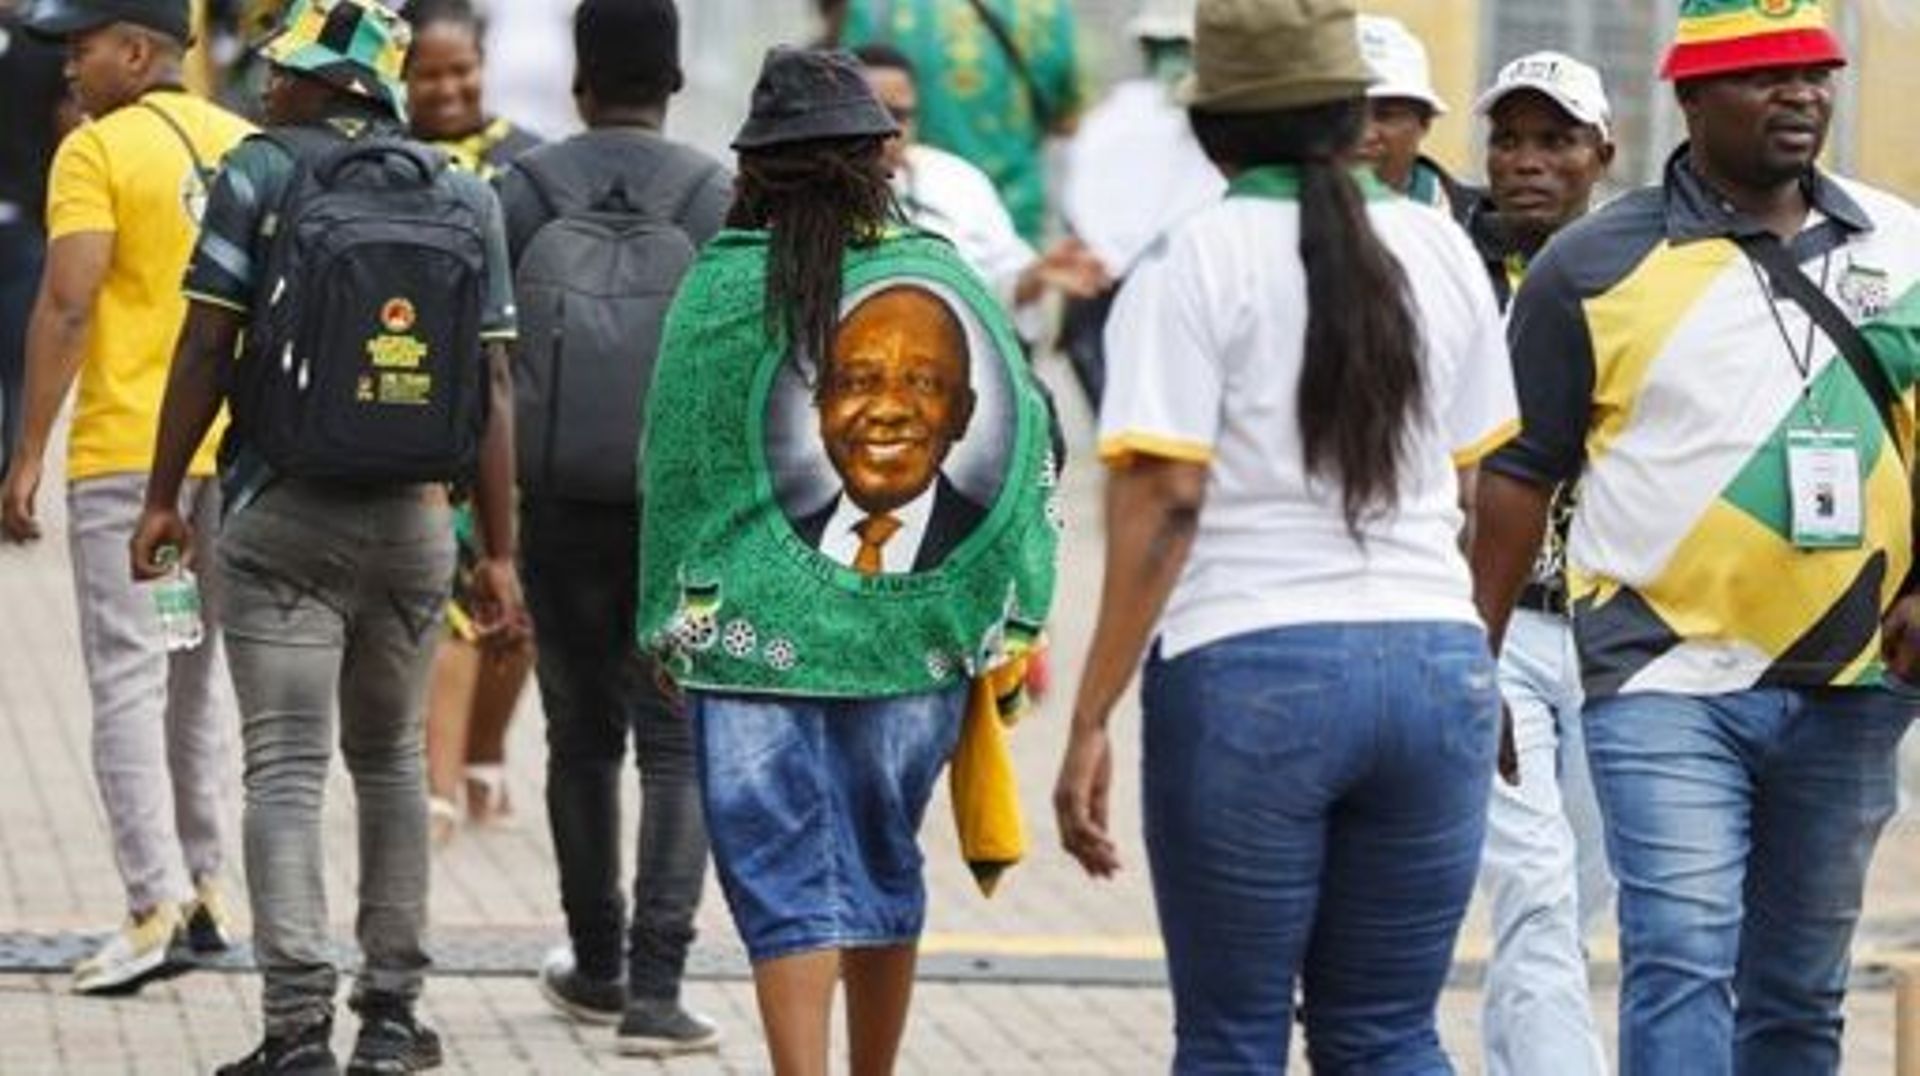 A delegate wearing a fabric printed with the face of South African President Cyril Ramaphosa walk towards the main plenary hall during the third day of the 55th National Conference of the African National Congress (ANC) at the National Recreation Center (